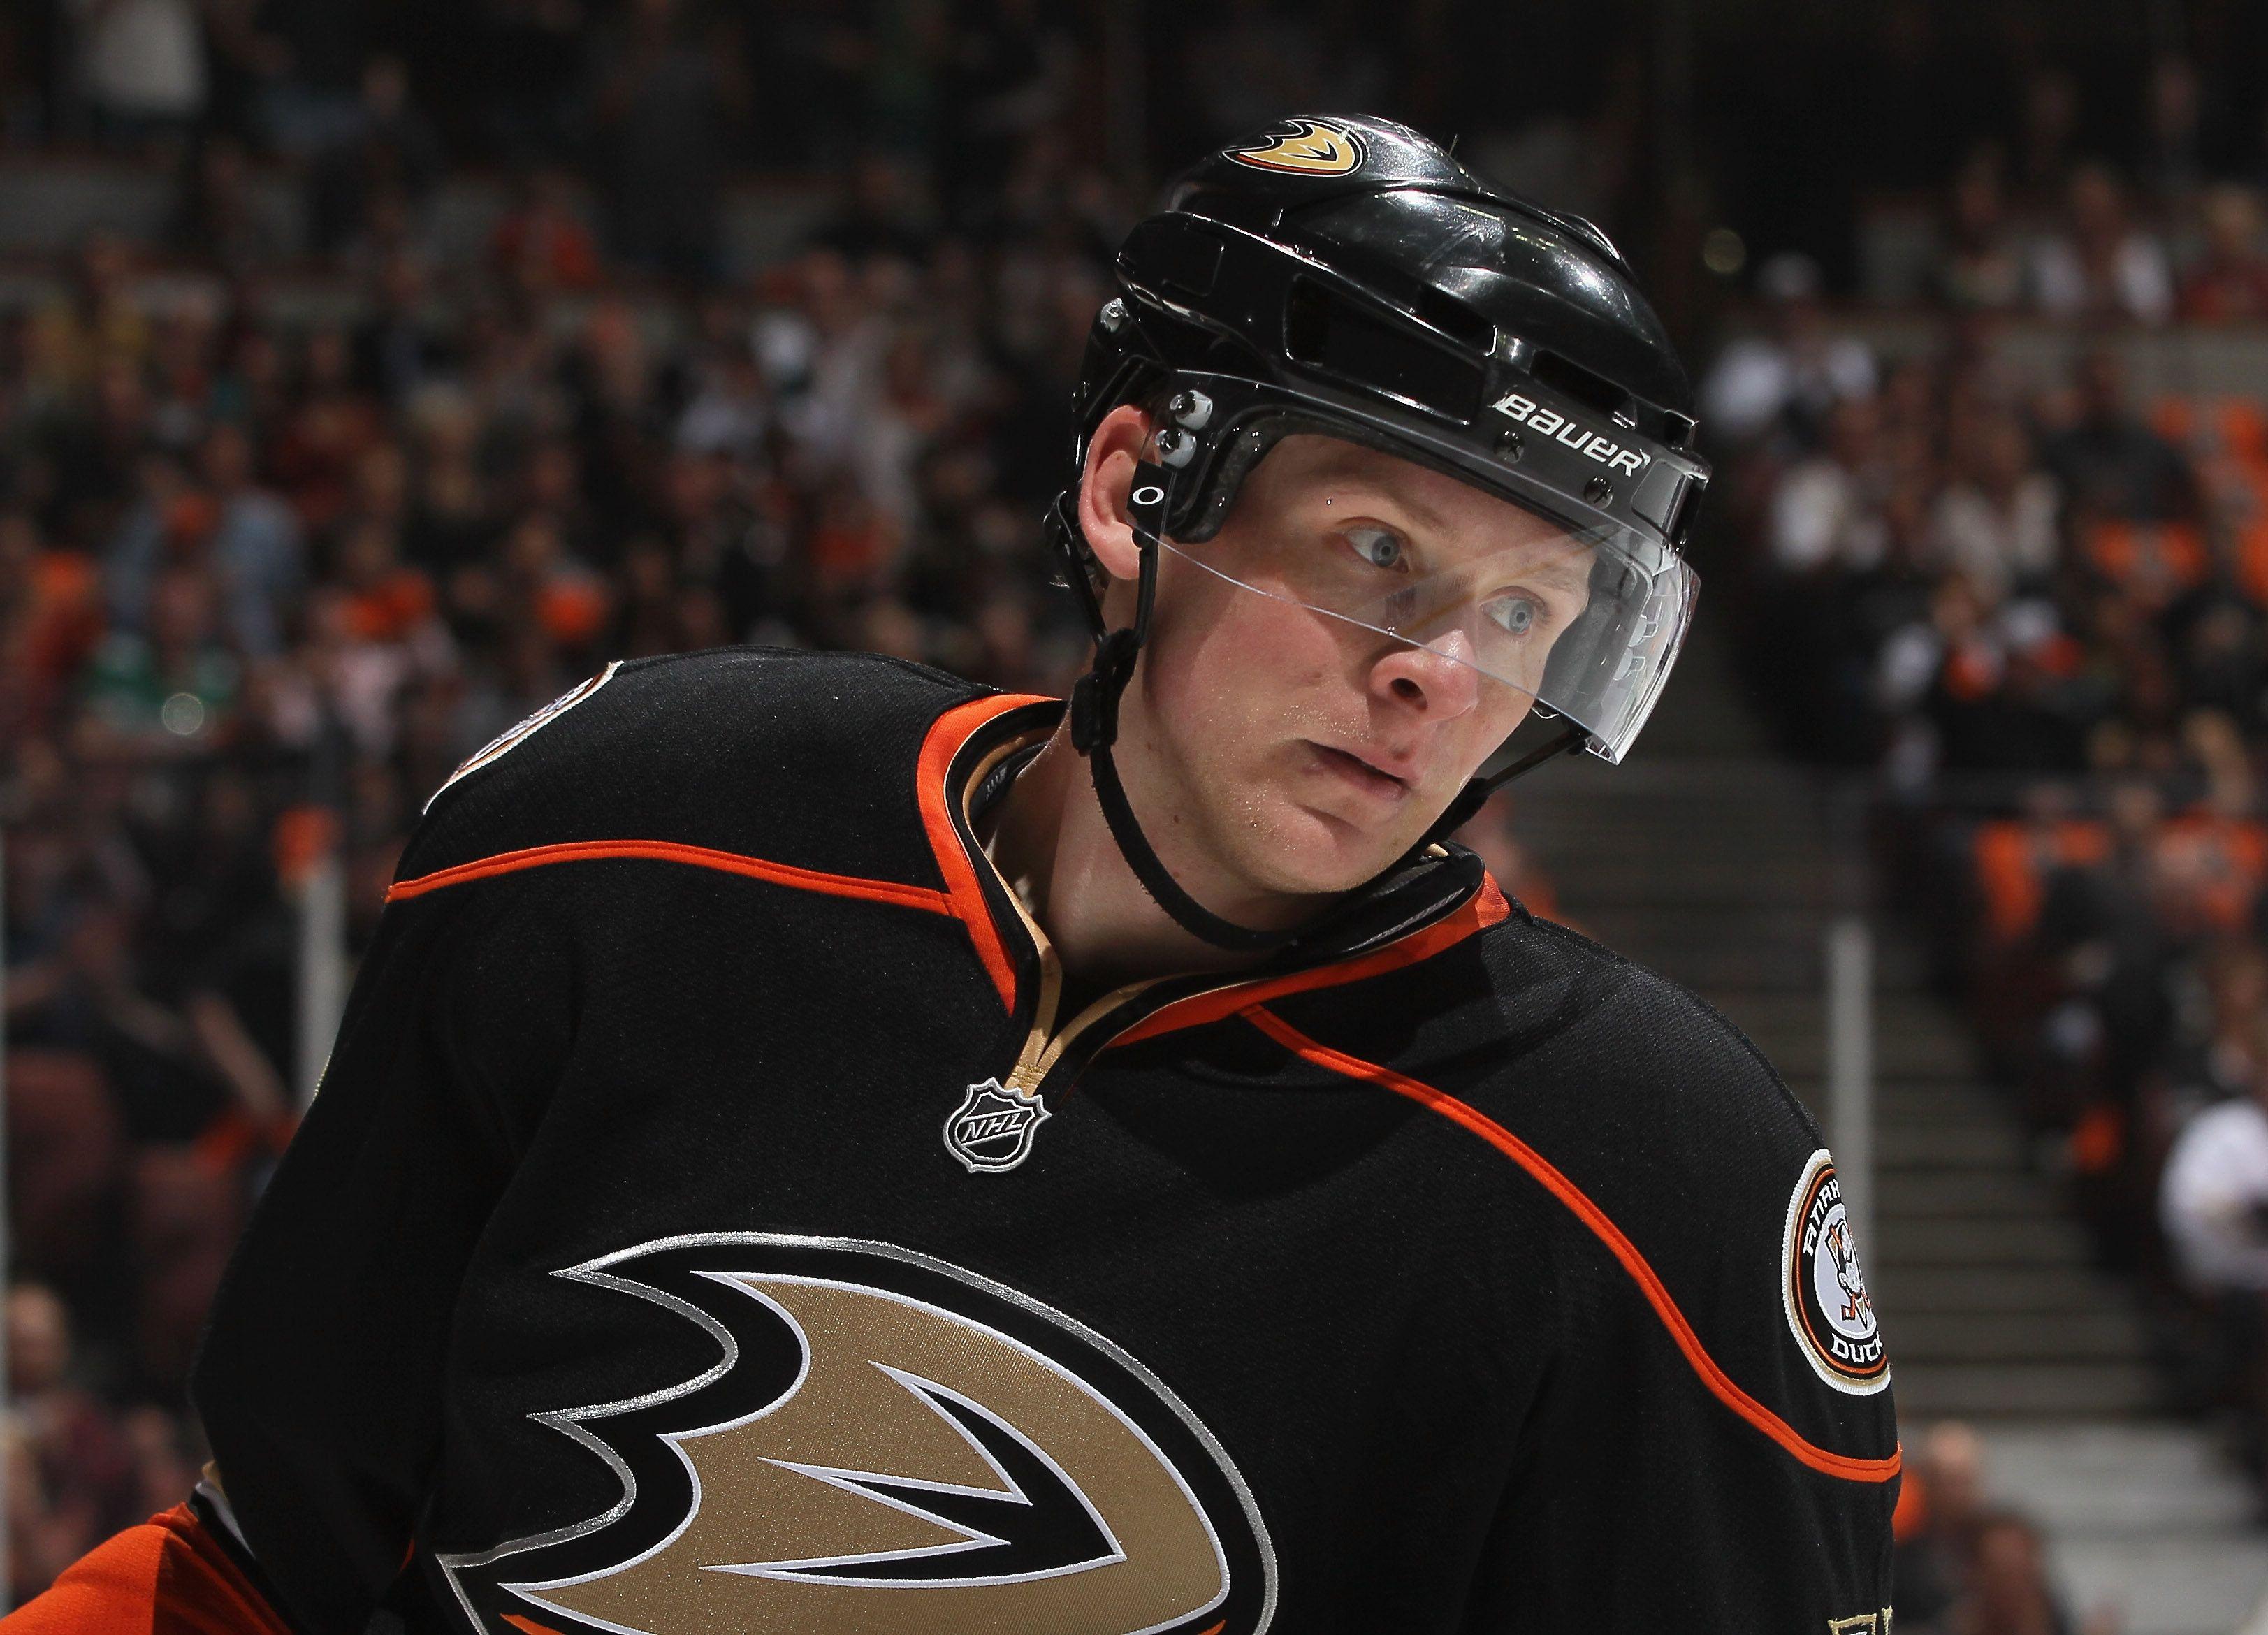 Corey Perry wallpaper and image, picture, photo